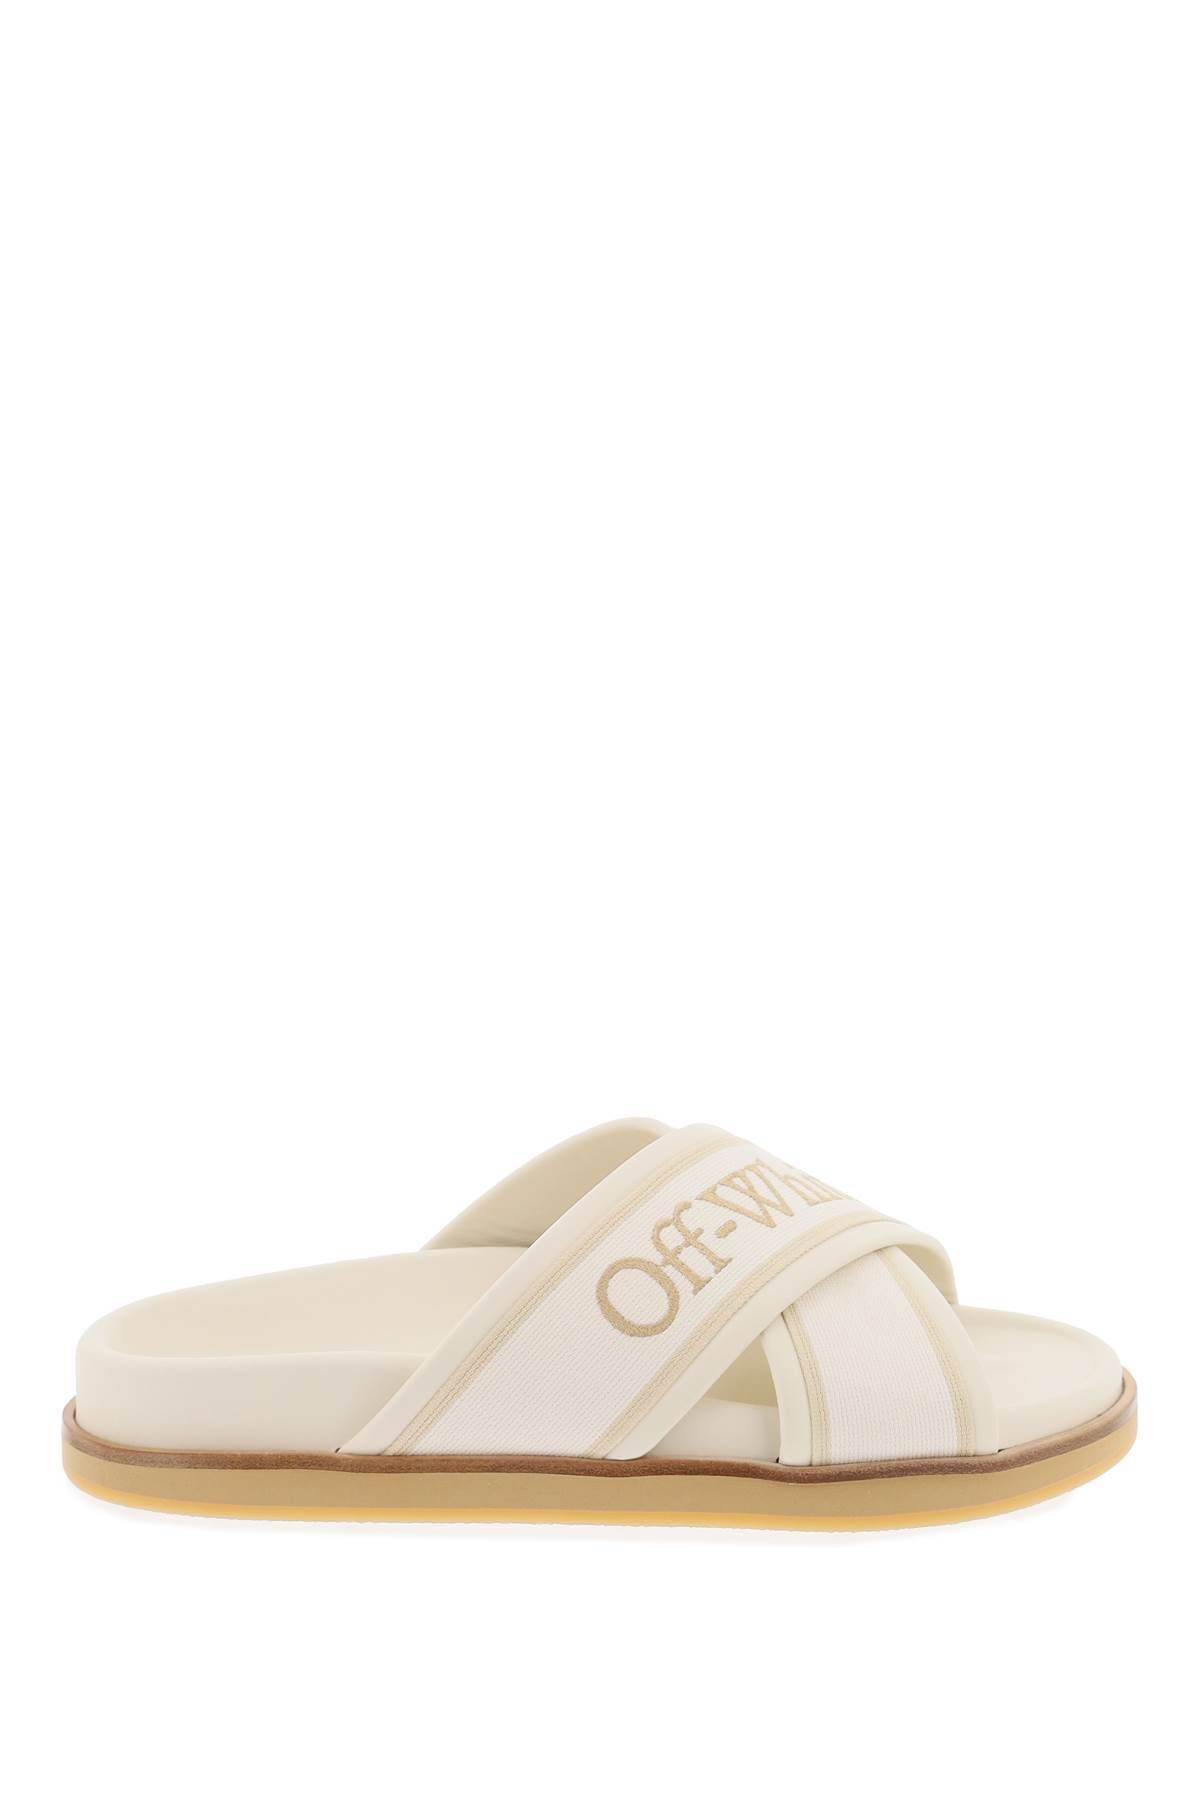 OFF-WHITE OFF-WHITE embroidered logo slides with